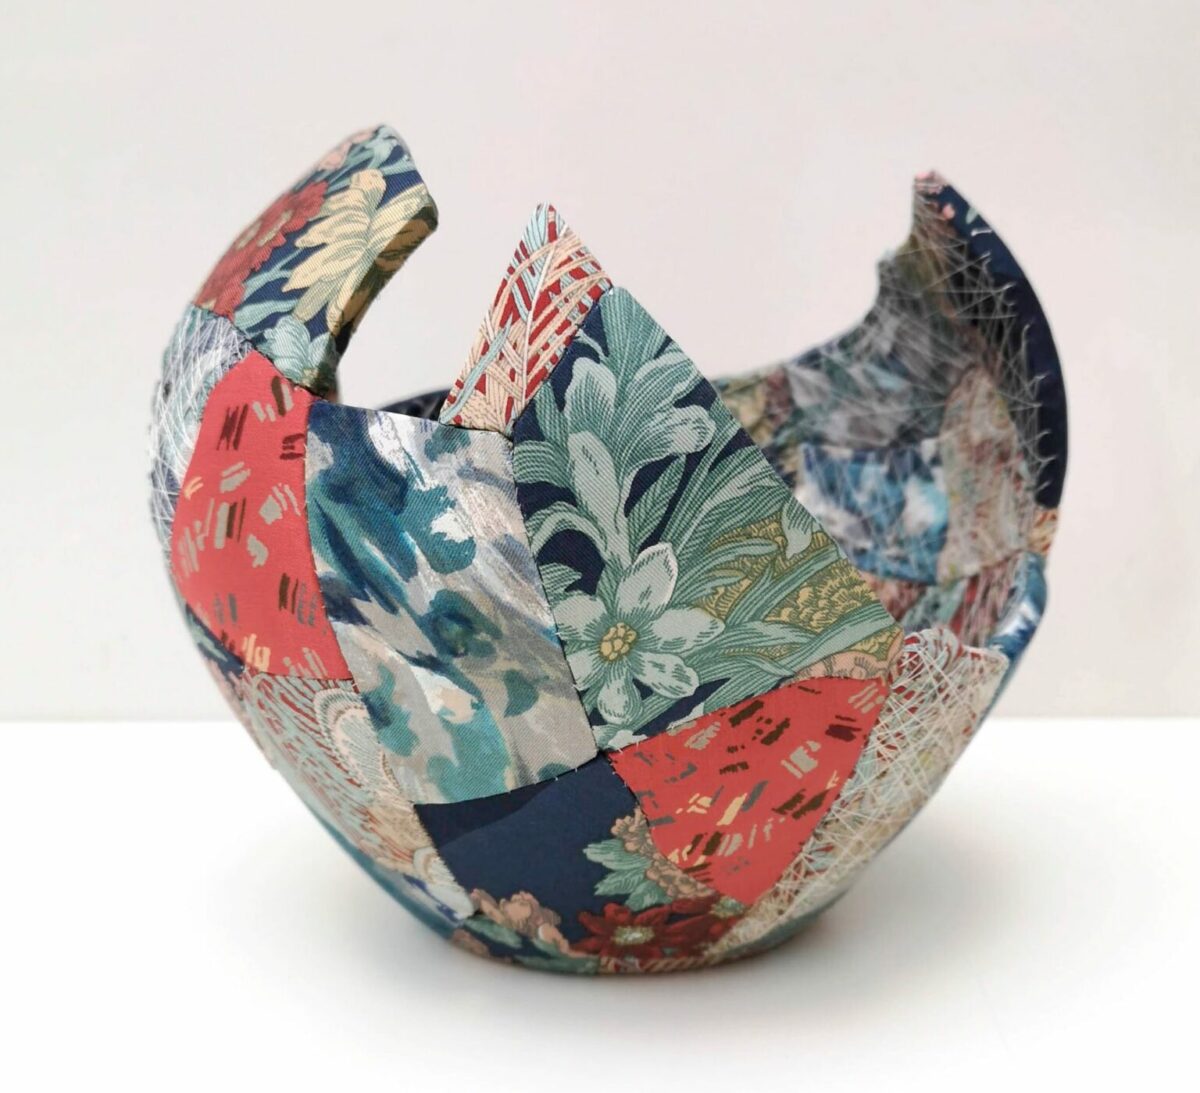 Shattered Vases And Bowls Revitalized With Vintage Patterned Fabrics By Zoe Hillyard 7